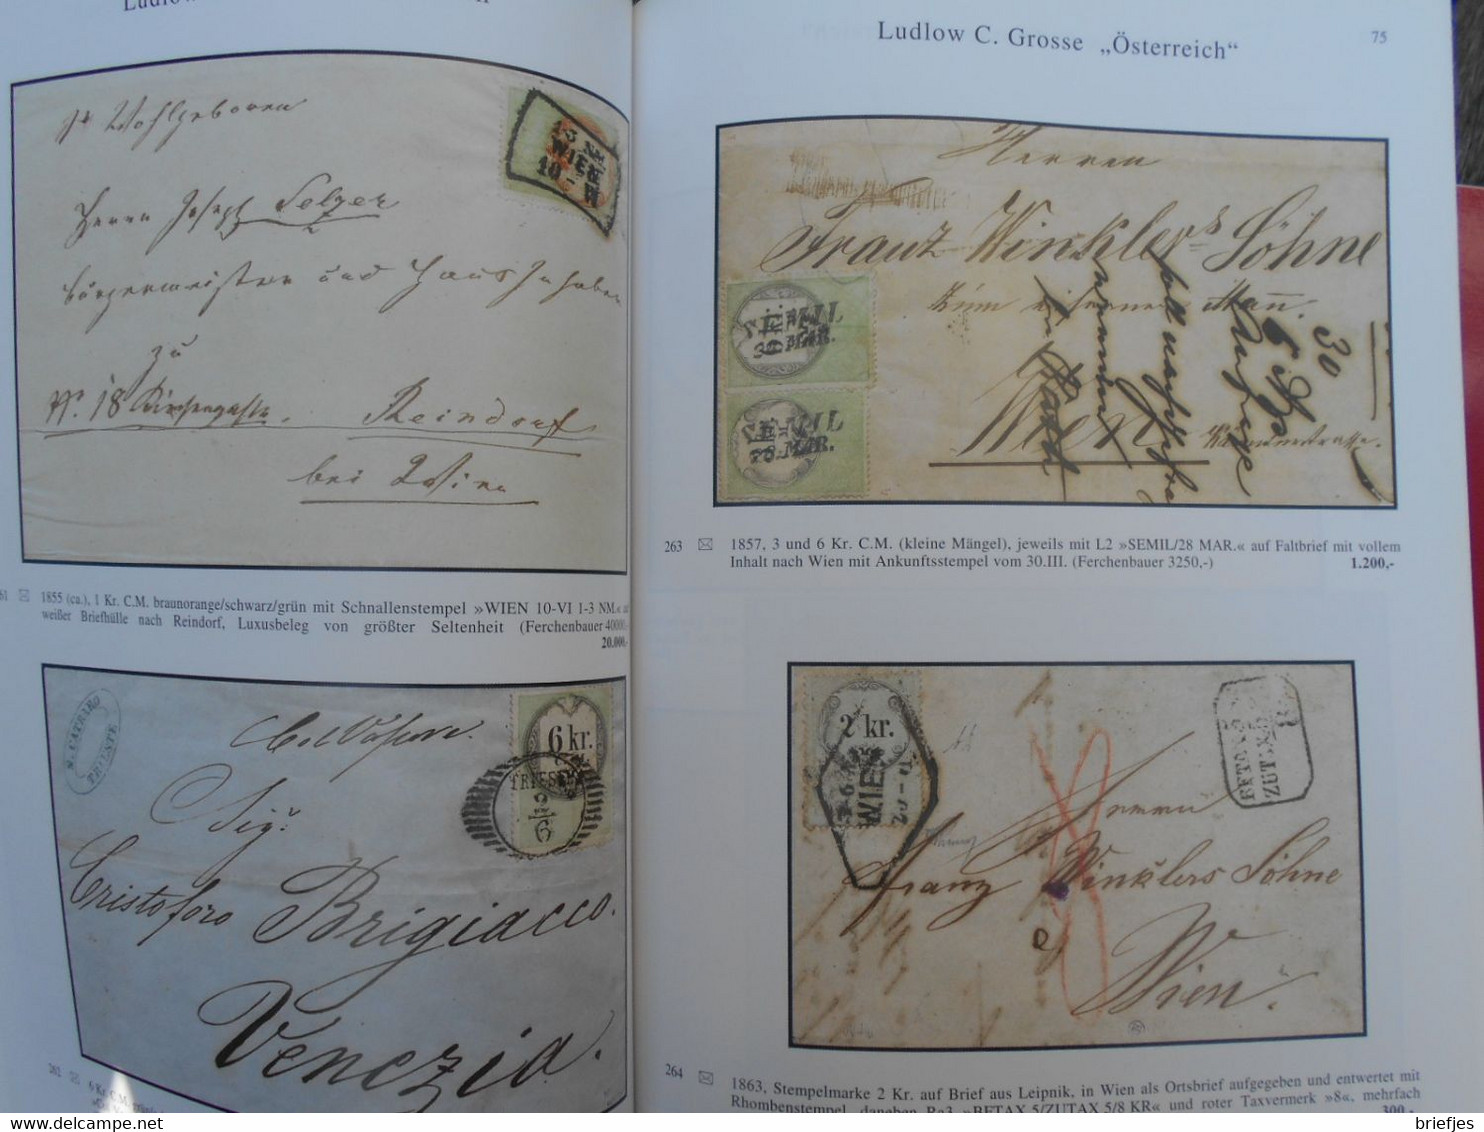 The Ludlow C. Grosse collection, largest Specialized collection ever,  Auction catalogue (119)